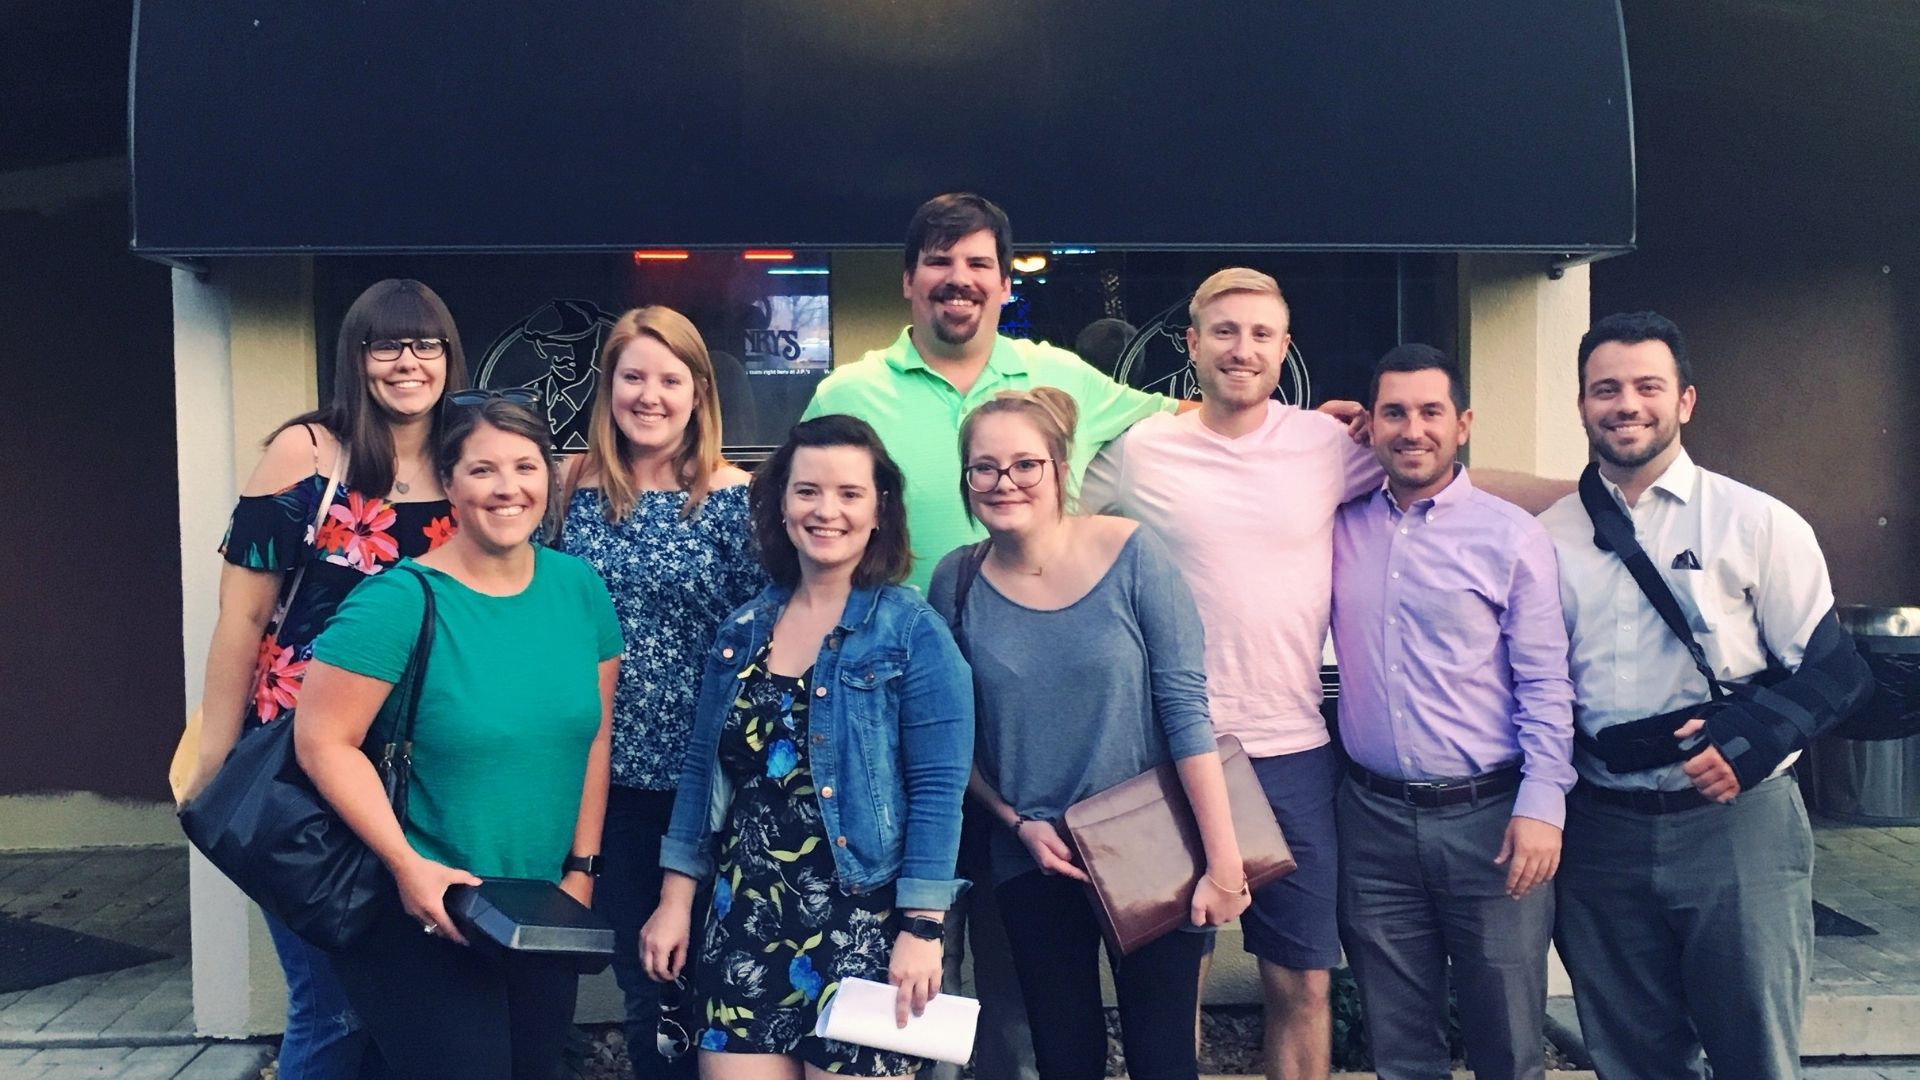 Group photo of Generation Mid-Ohio Valley at their September 2019 monthly meeting